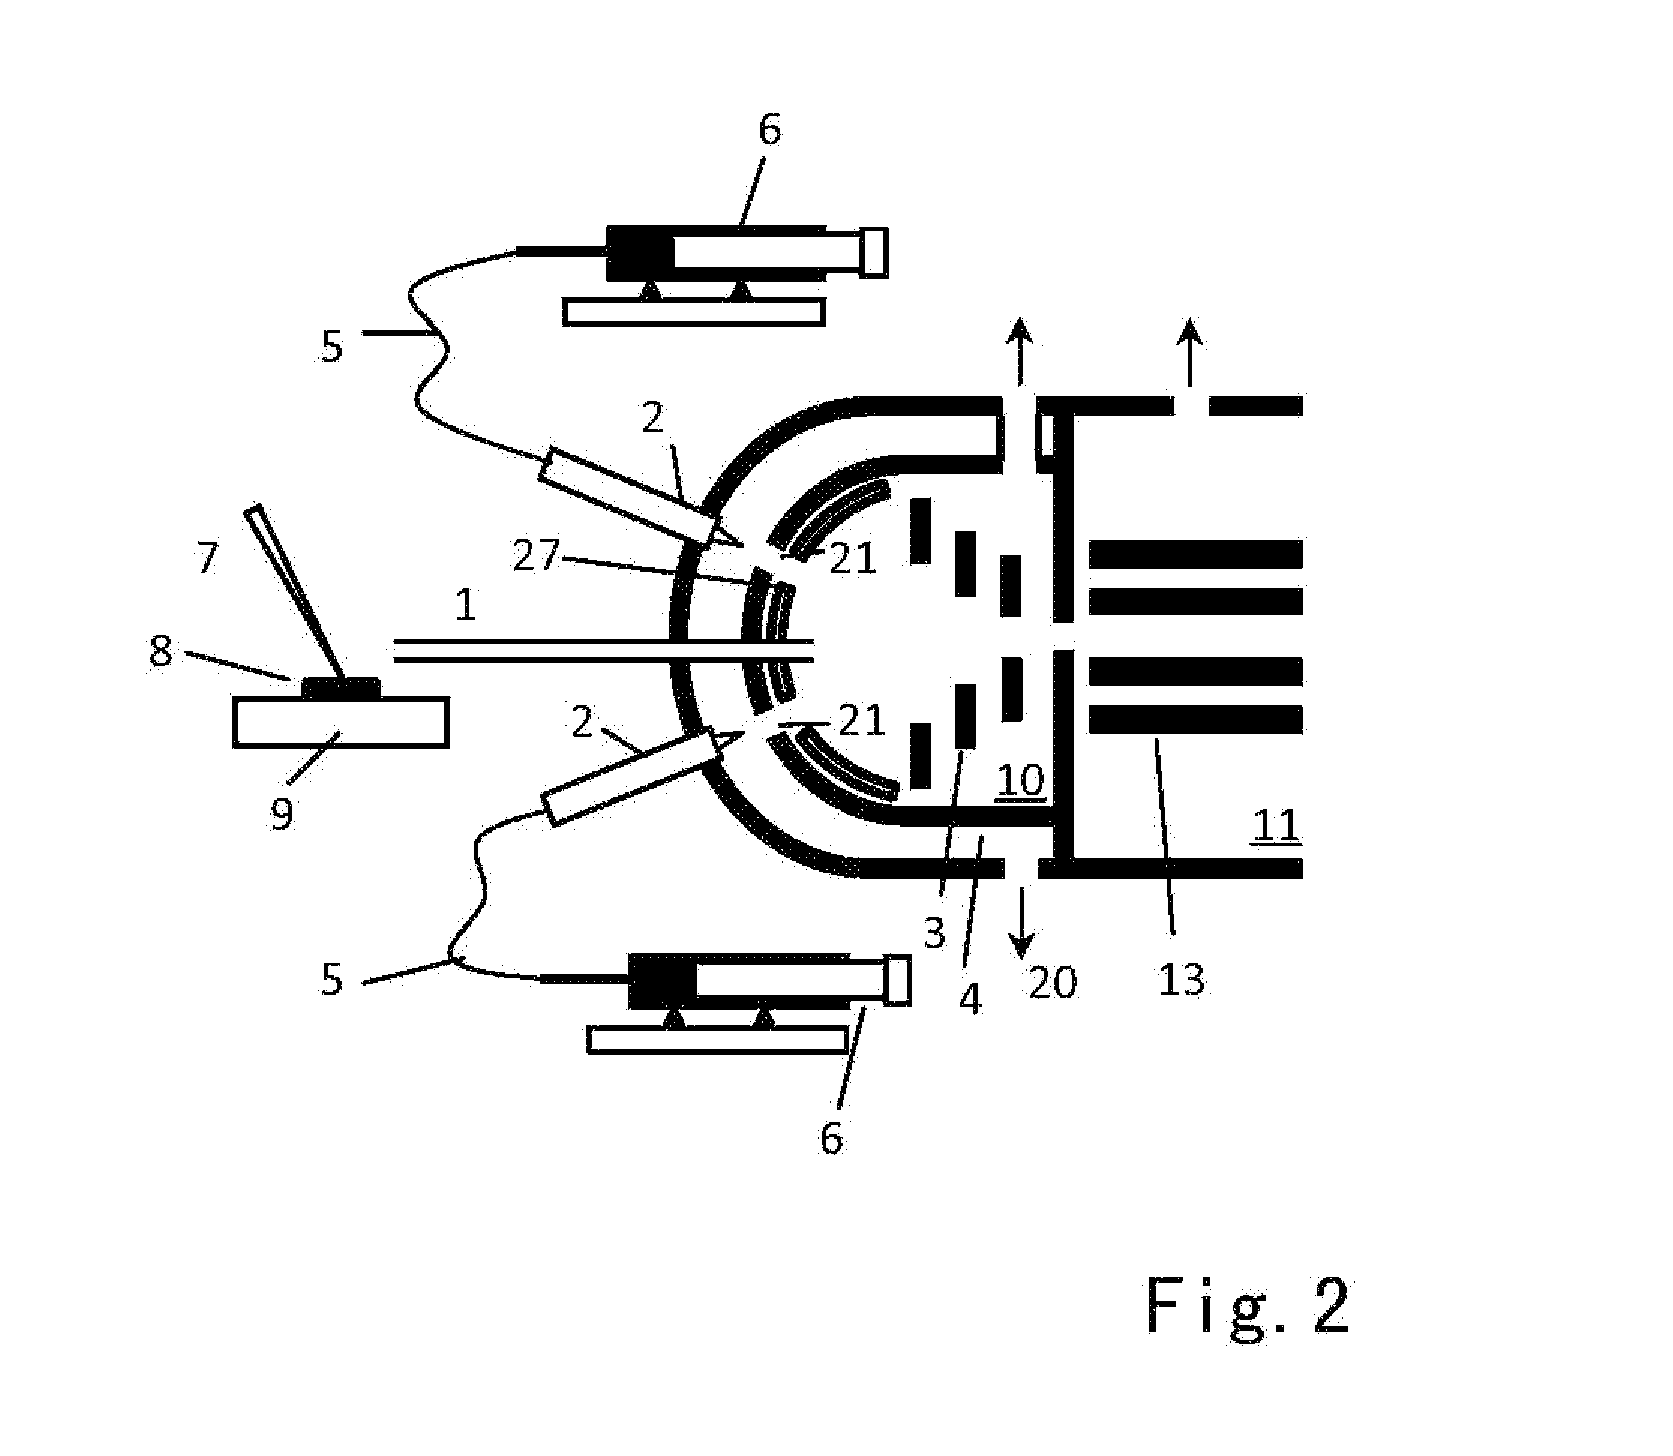 Method and apparatus for generating and analyzing ions